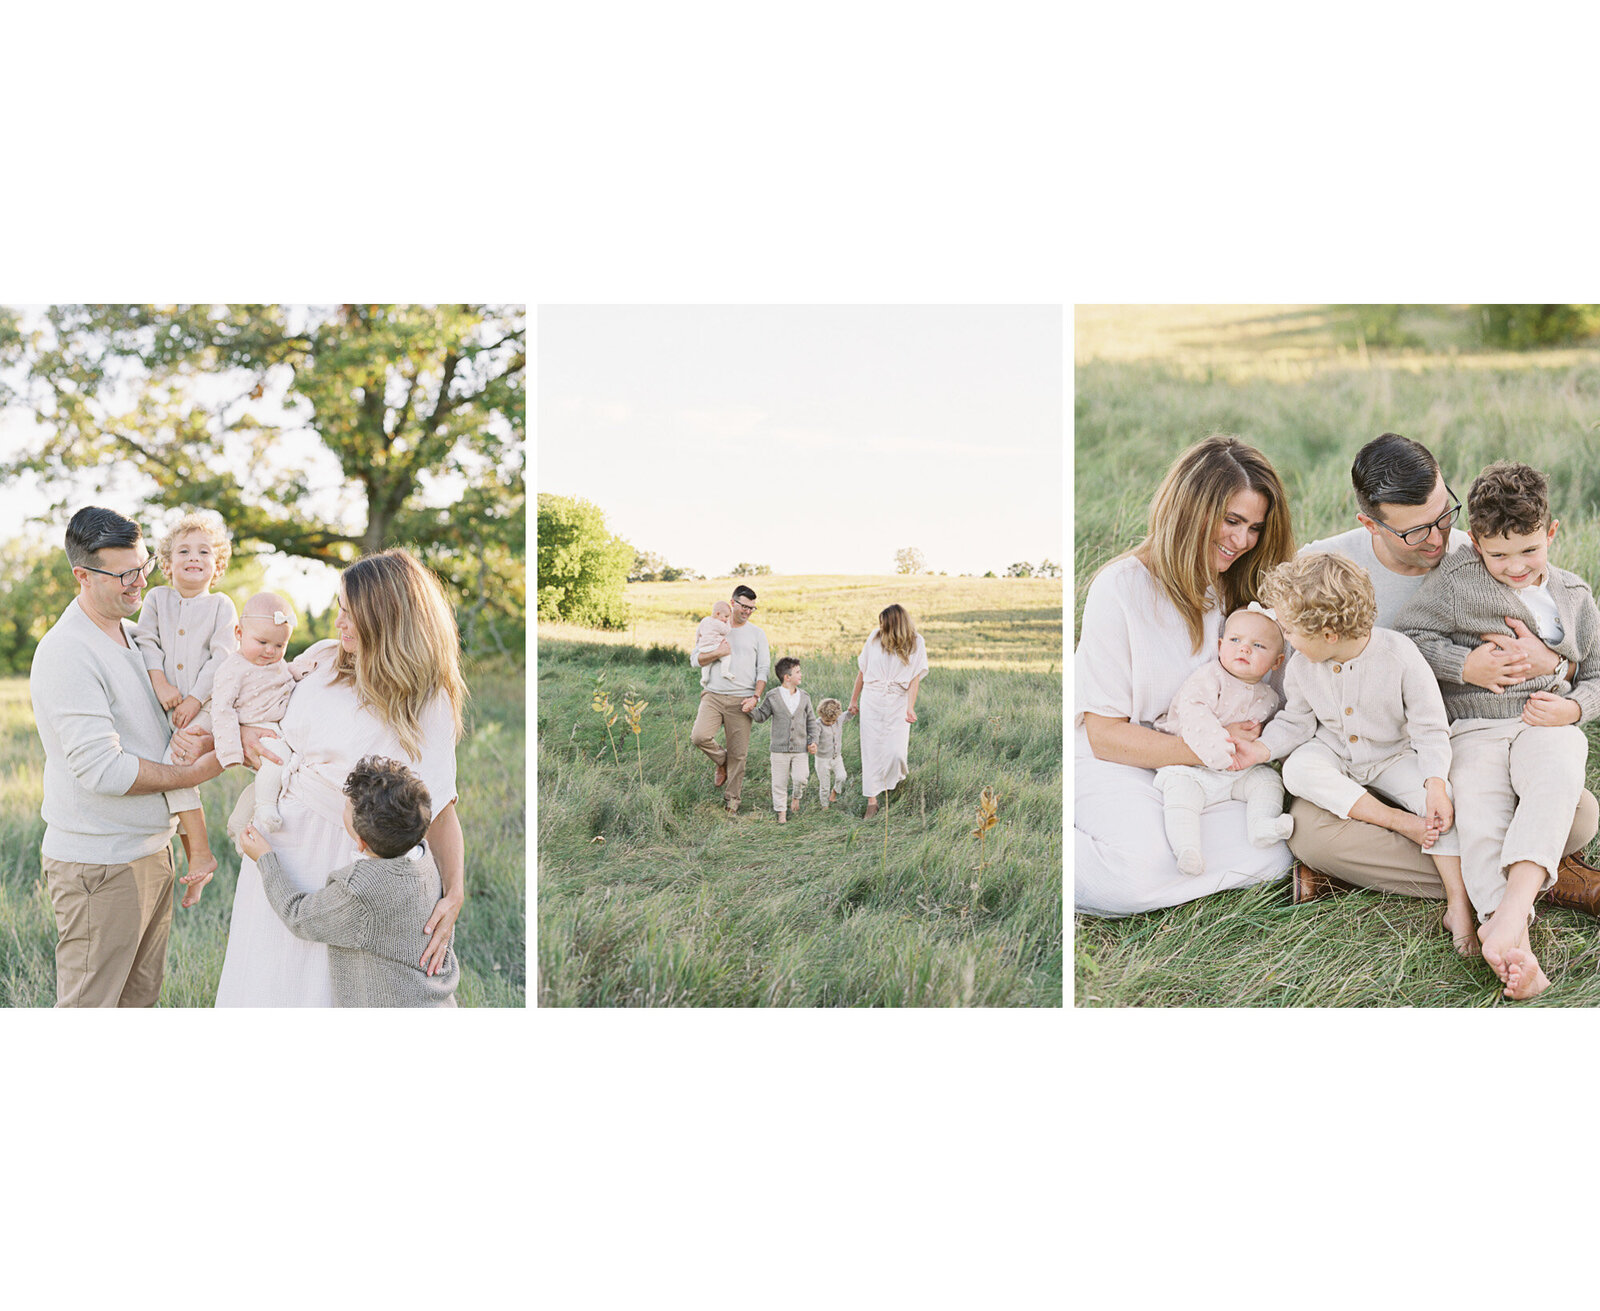 family in high end clothing during spring family session in a grassy field by Milwaukee photographer, Talia Laird Photography